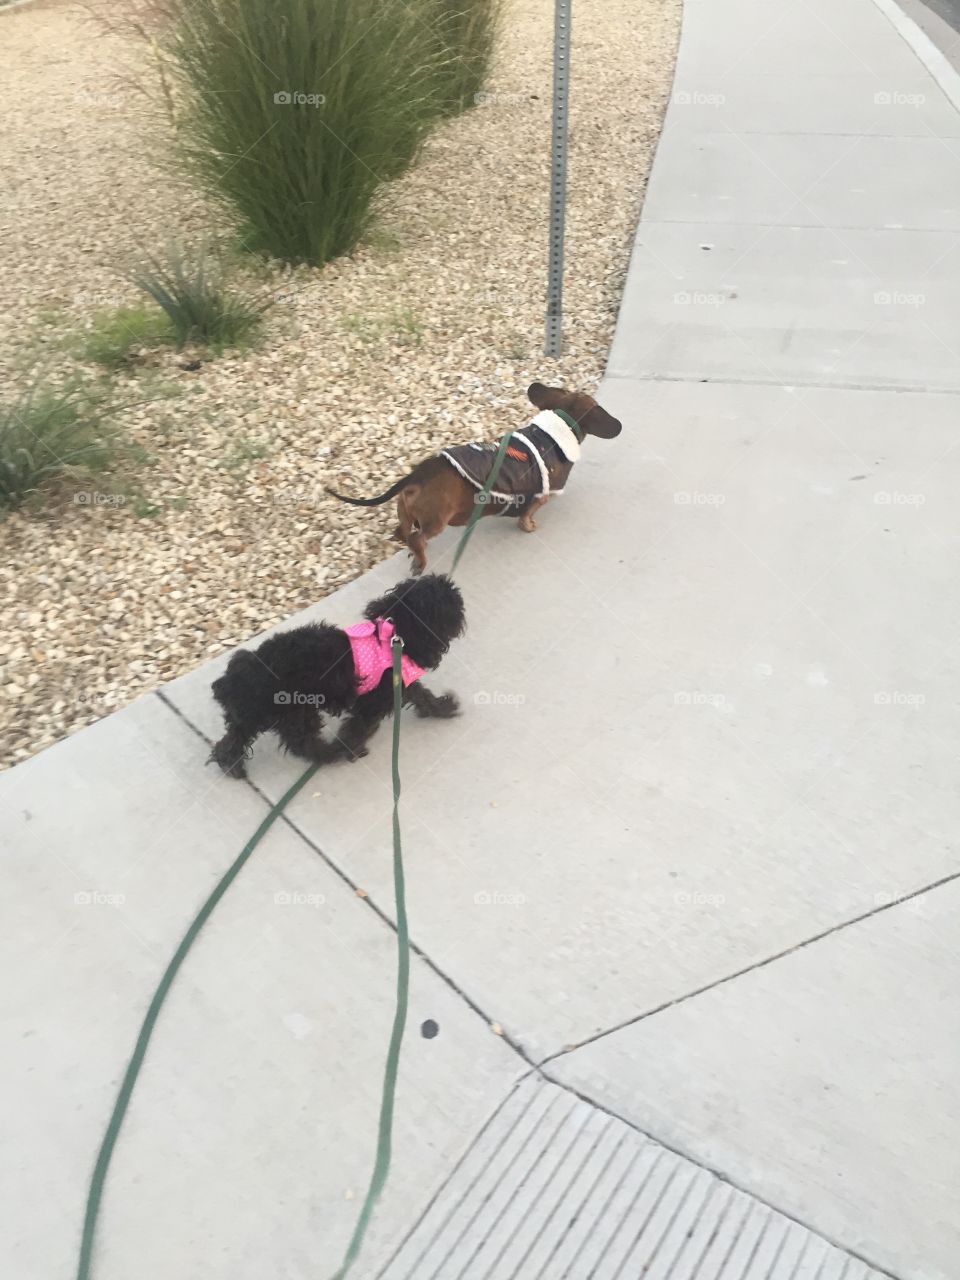 Pinky the pikapoo, and Peck the dachshund (an inseparable canine couple) go for a morning walk with their owner.